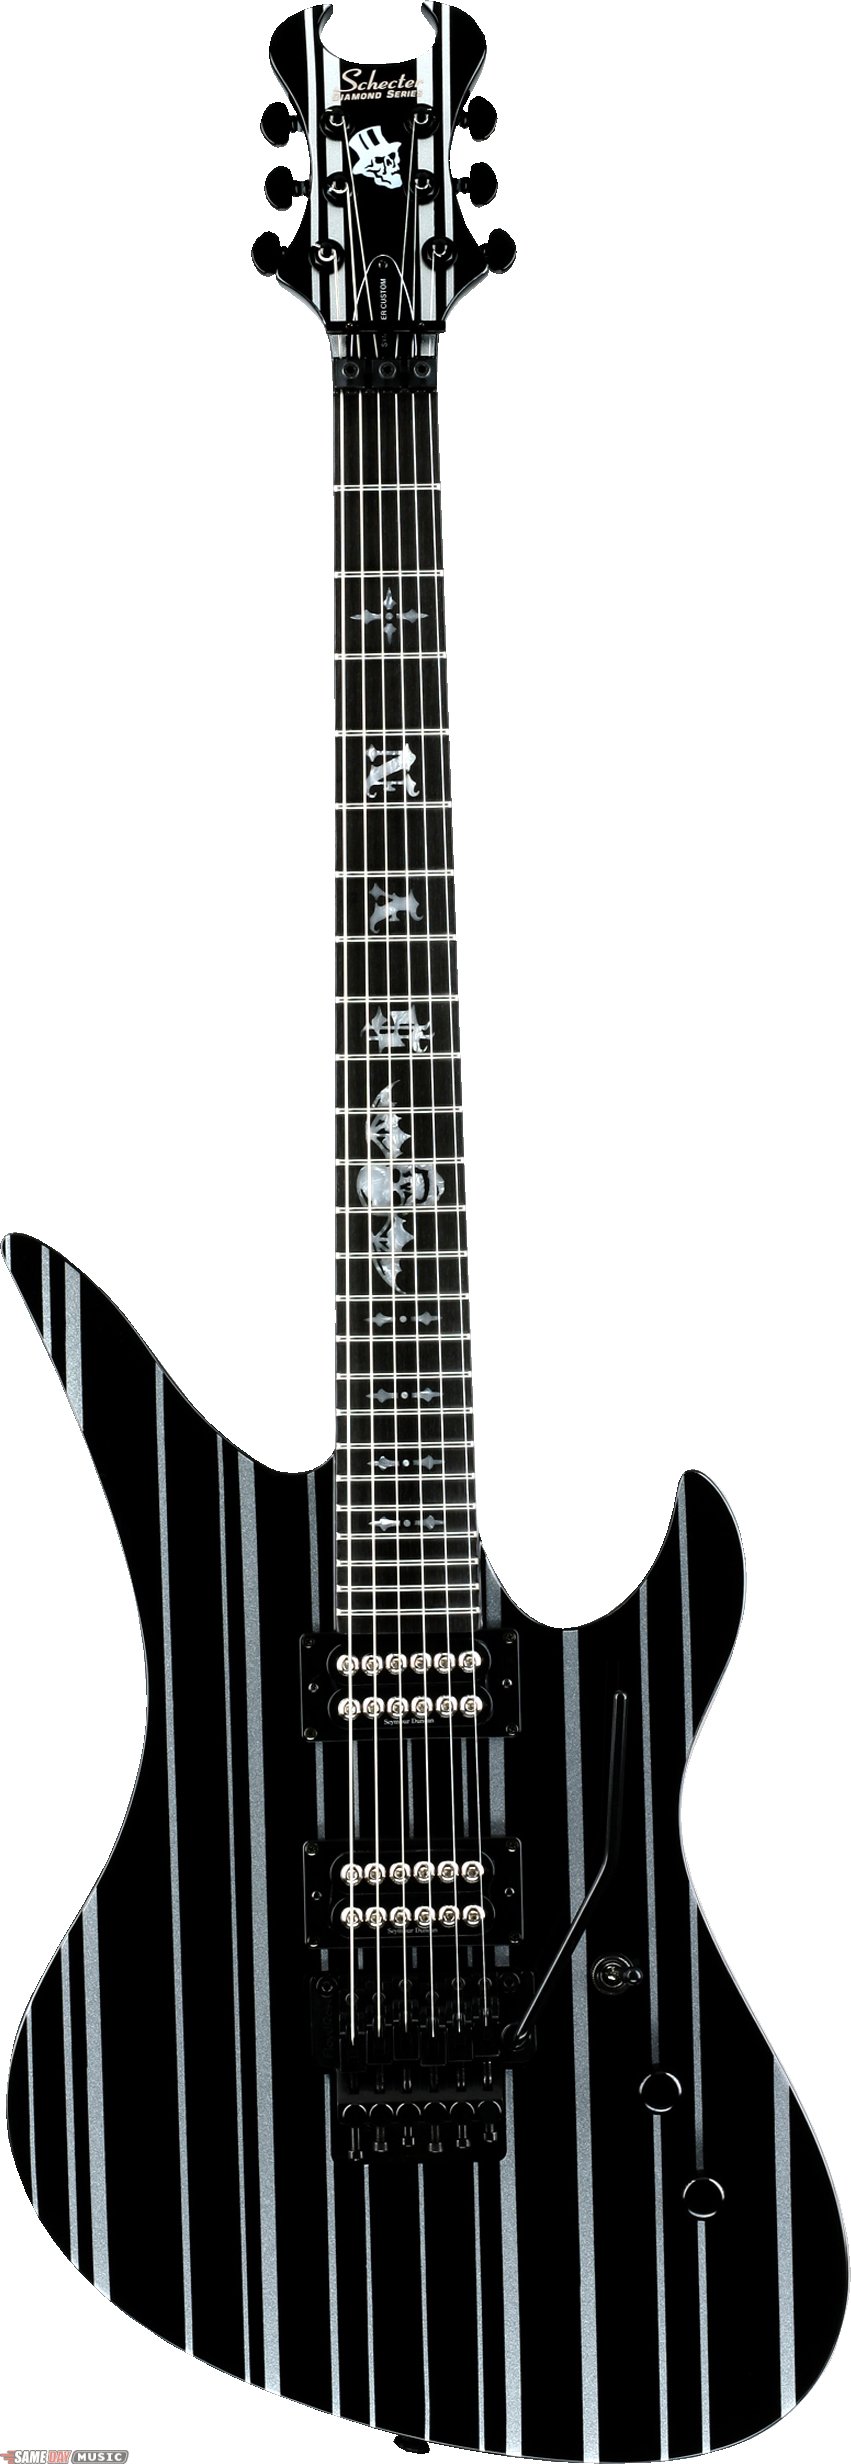 schecter synyster custom outline